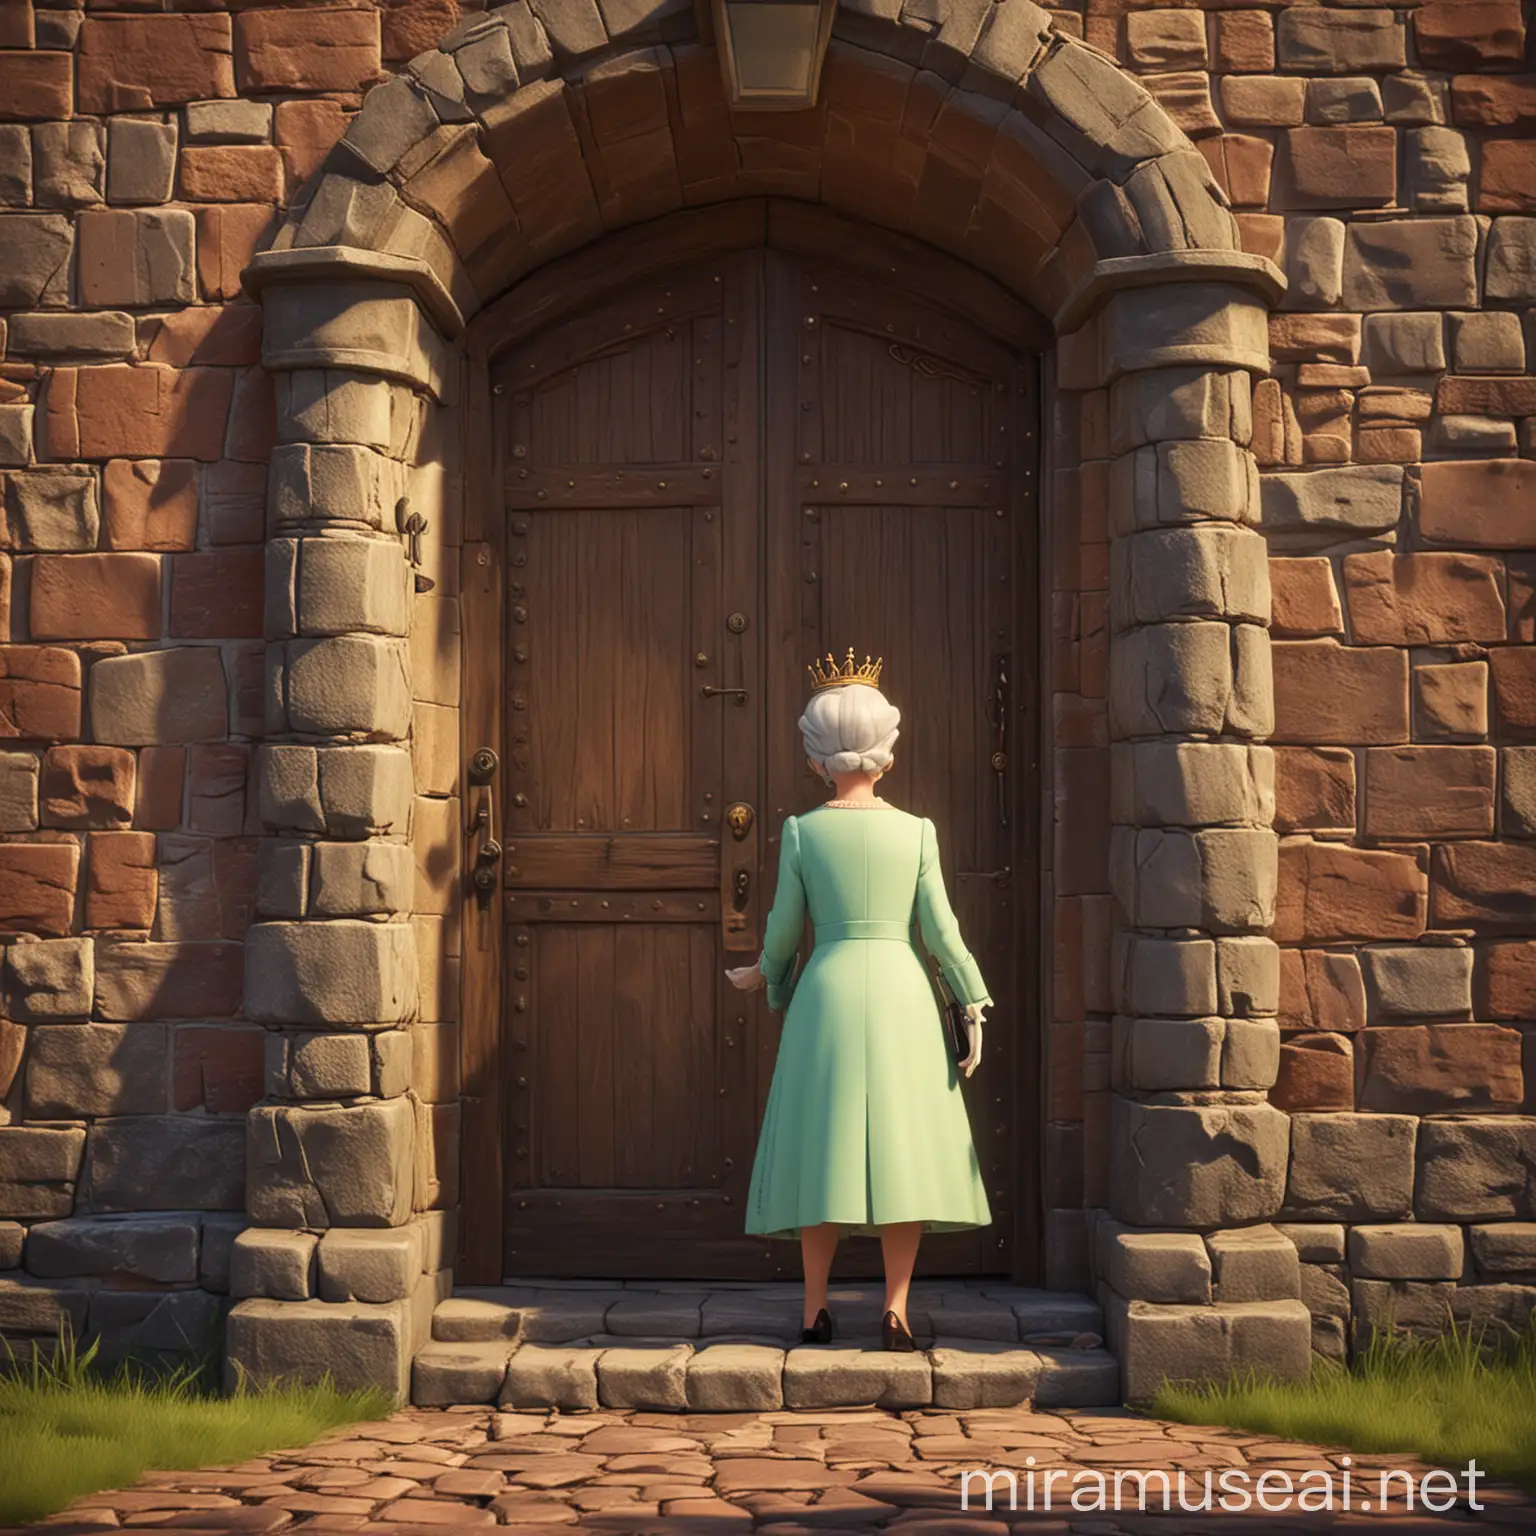 The queen is about to reach the castle, but the door has not yet opened，pixar style